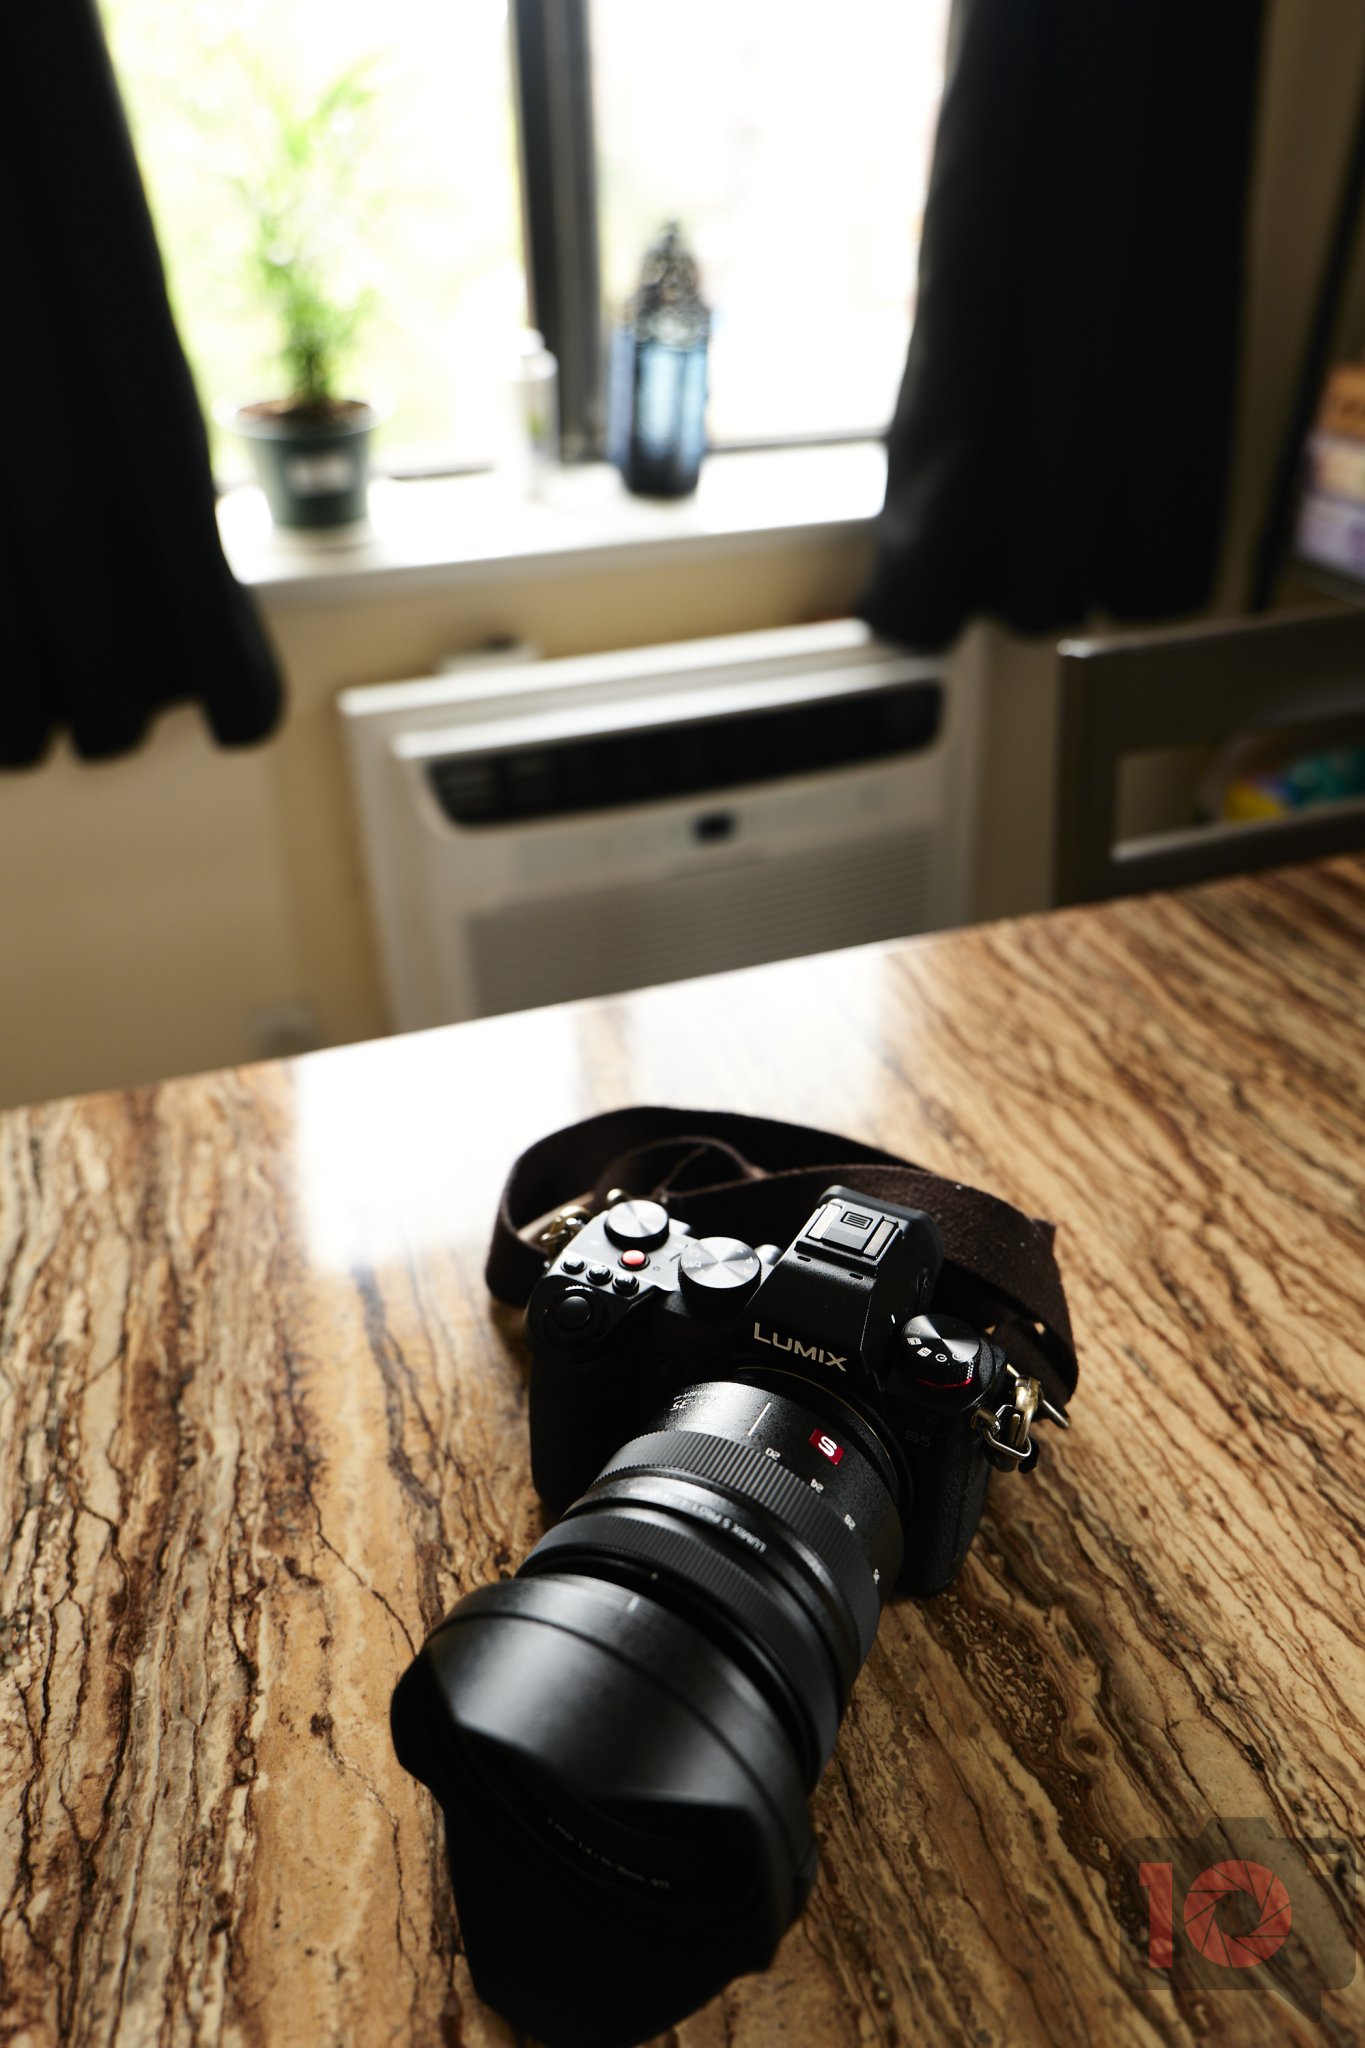 Beyond Manual Mode Teaches You What You Don't Know